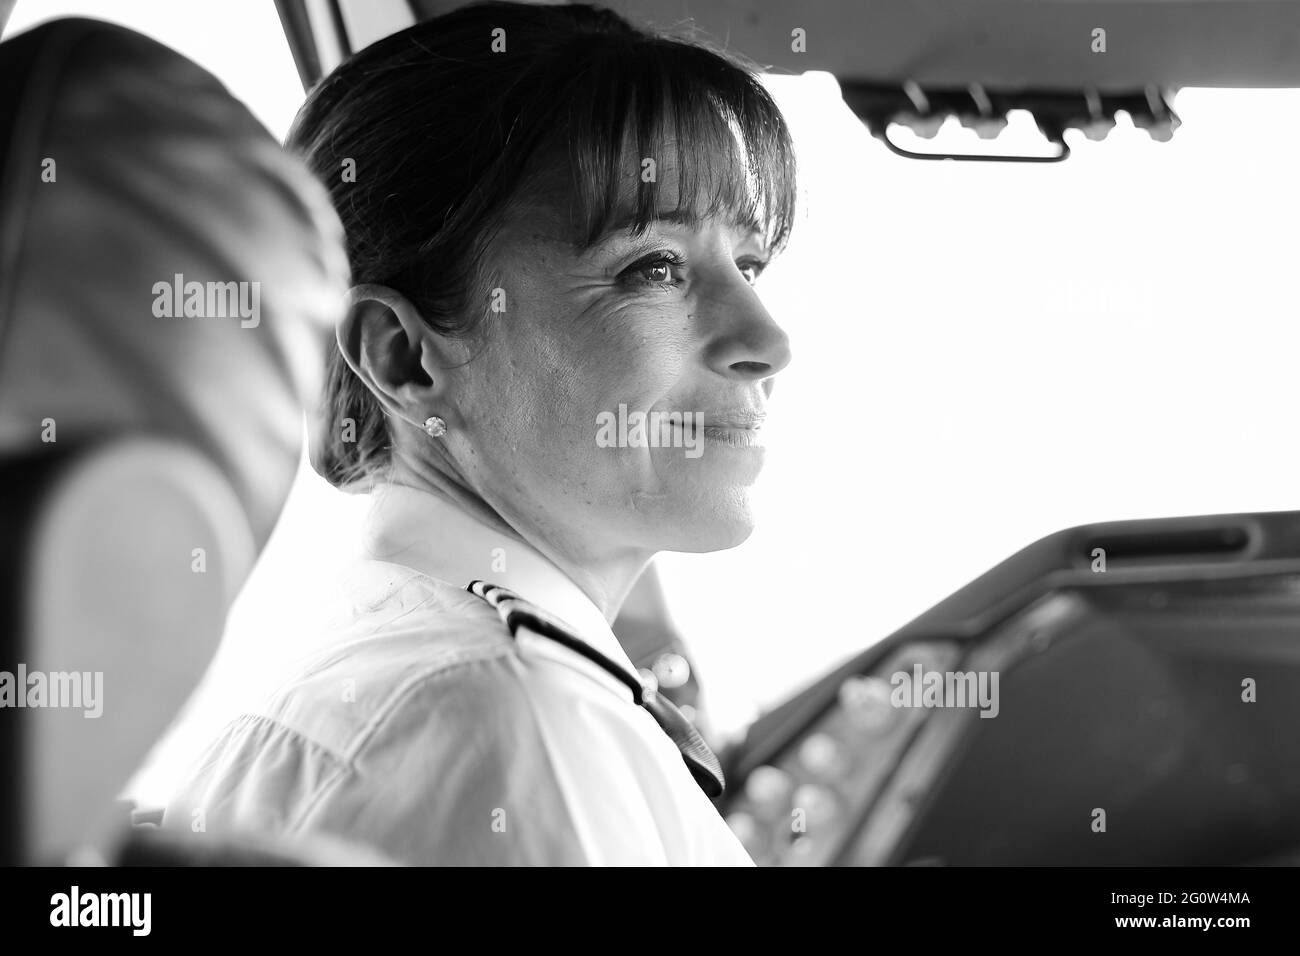 JOHANNESBURG, SOUTH AFRICA - Jan 06, 2021: Johannesburg, South Africa - May 08 2012: British Airways Middle Aged Female Captain Pilot in an Airplane c Stock Photo